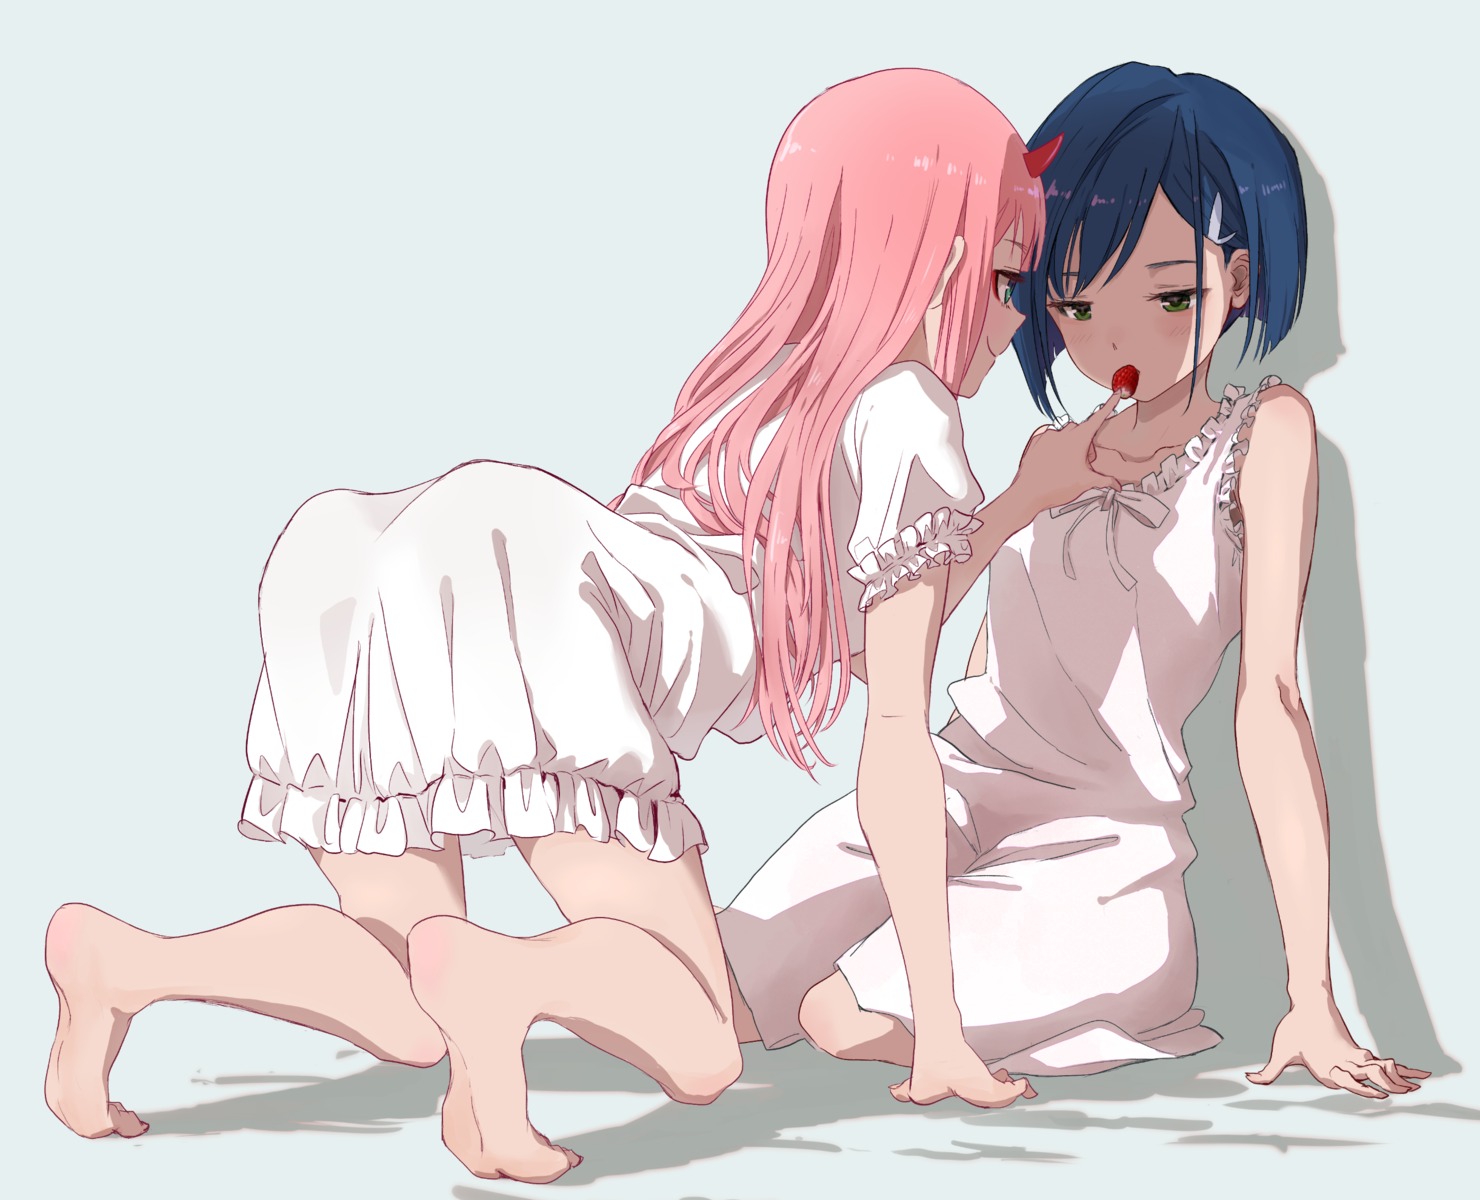 darling_in_the_franxx feet hasisisissy horns ichigo_(darling_in_the_franxx) pajama zero_two_(darling_in_the_franxx)